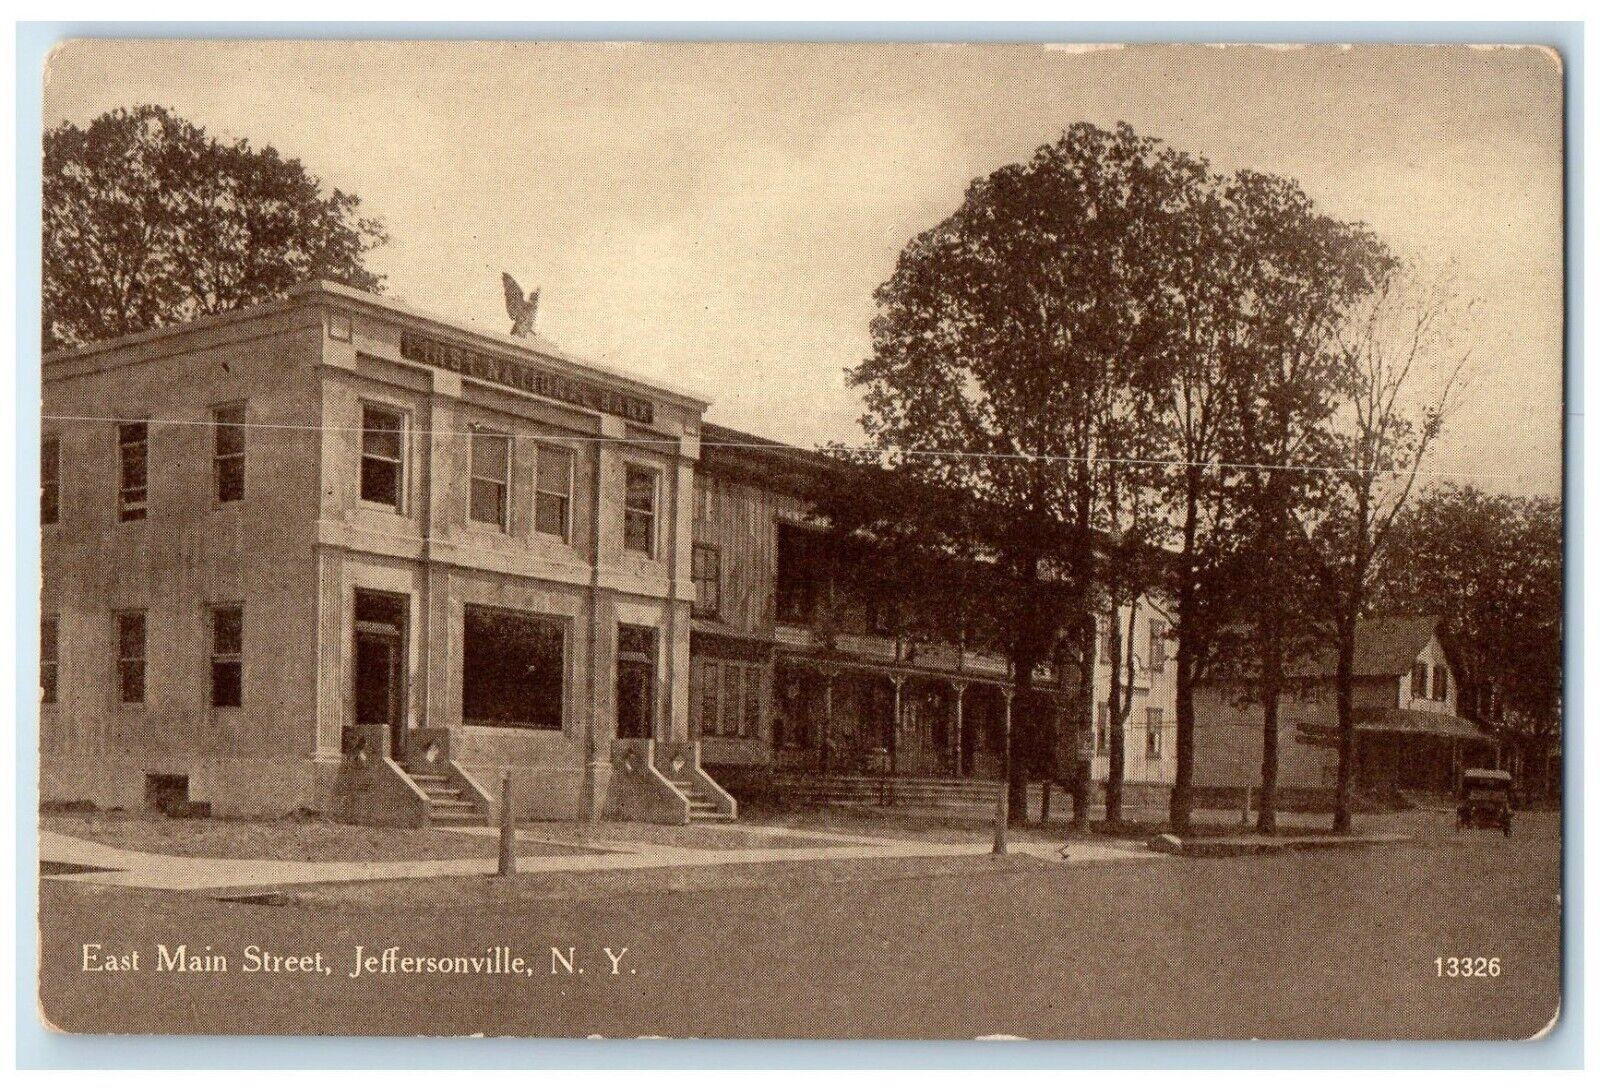 c1915 East Main Street First National Bank Building Jeffersonville NY Postcard